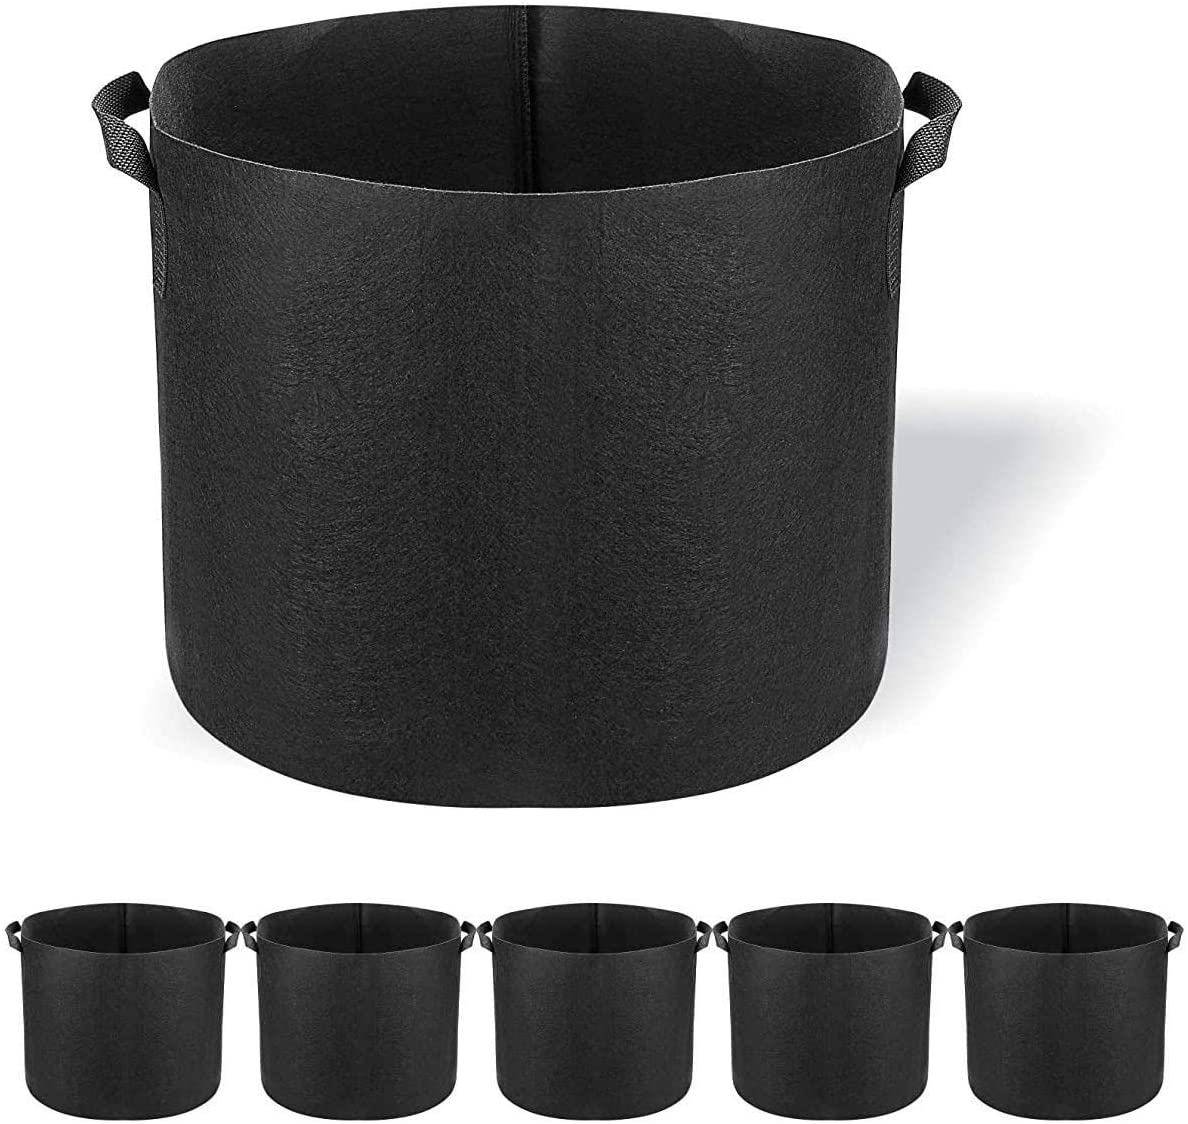 5 Pack Grow Bags Heavy Duty Thickened Non-Woven Aeration Fabric Pots with Strap Handles